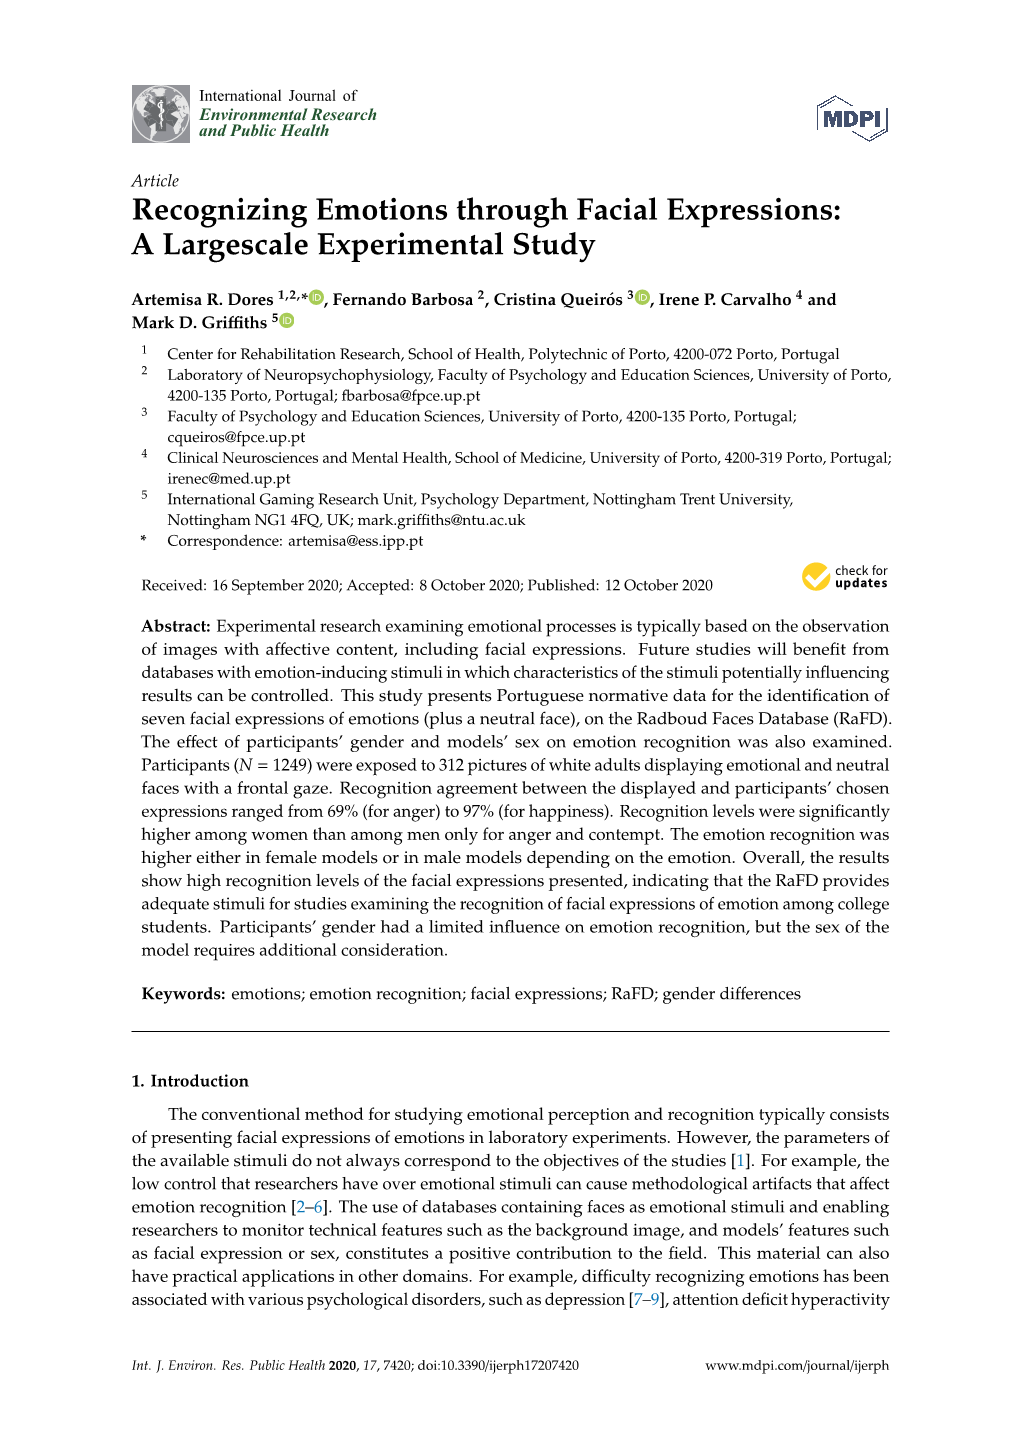 Recognizing Emotions Through Facial Expressions: a Largescale Experimental Study